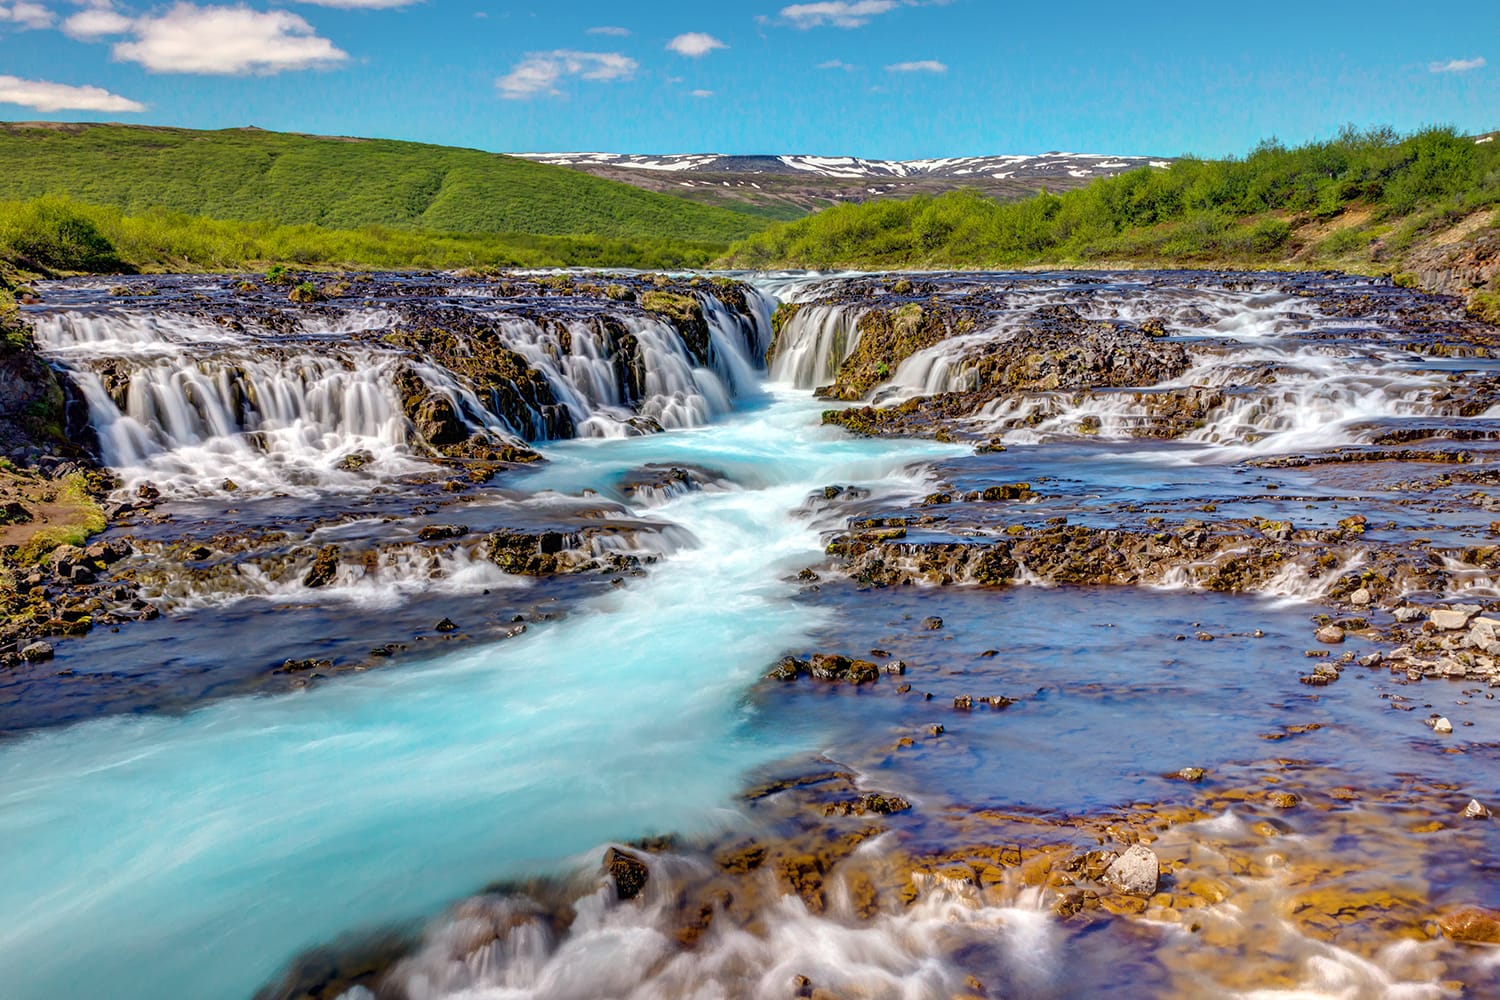 The lovely Bruarfoss waterfall in Iceland on a sunny day